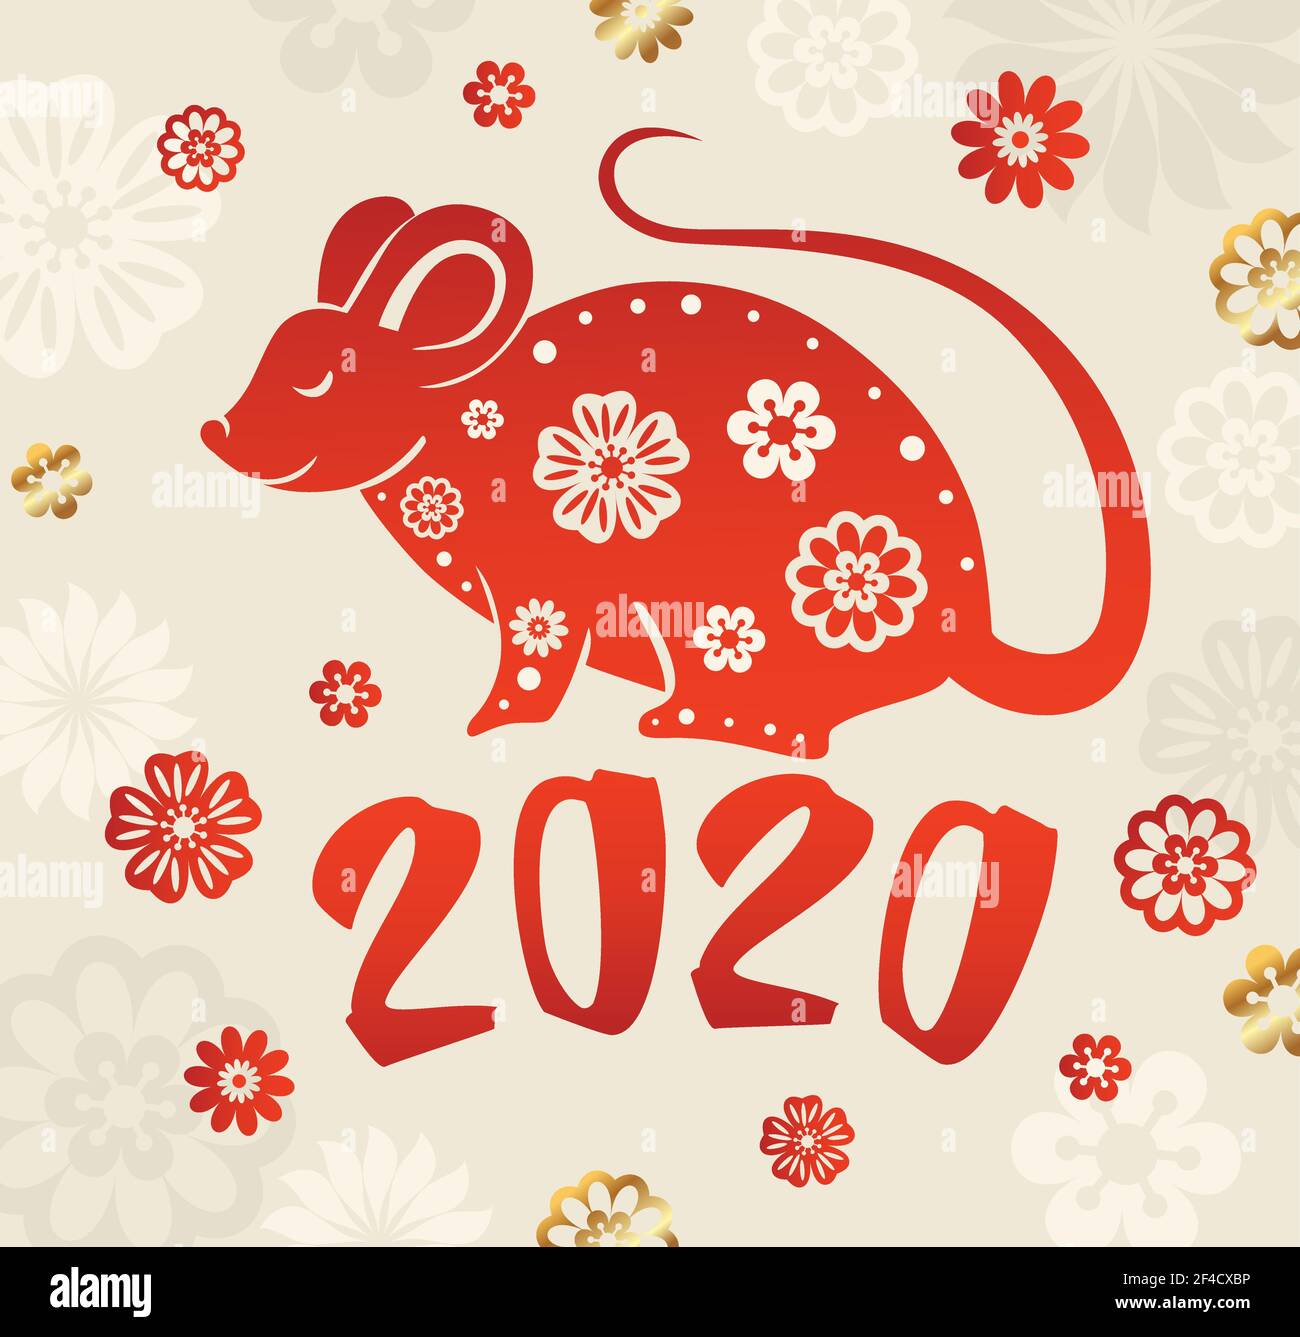 Cute rat symbol of Chinese zodiac for 2020 new year. Red silhouette of rat and flowers. Vector illustration Stock Vector